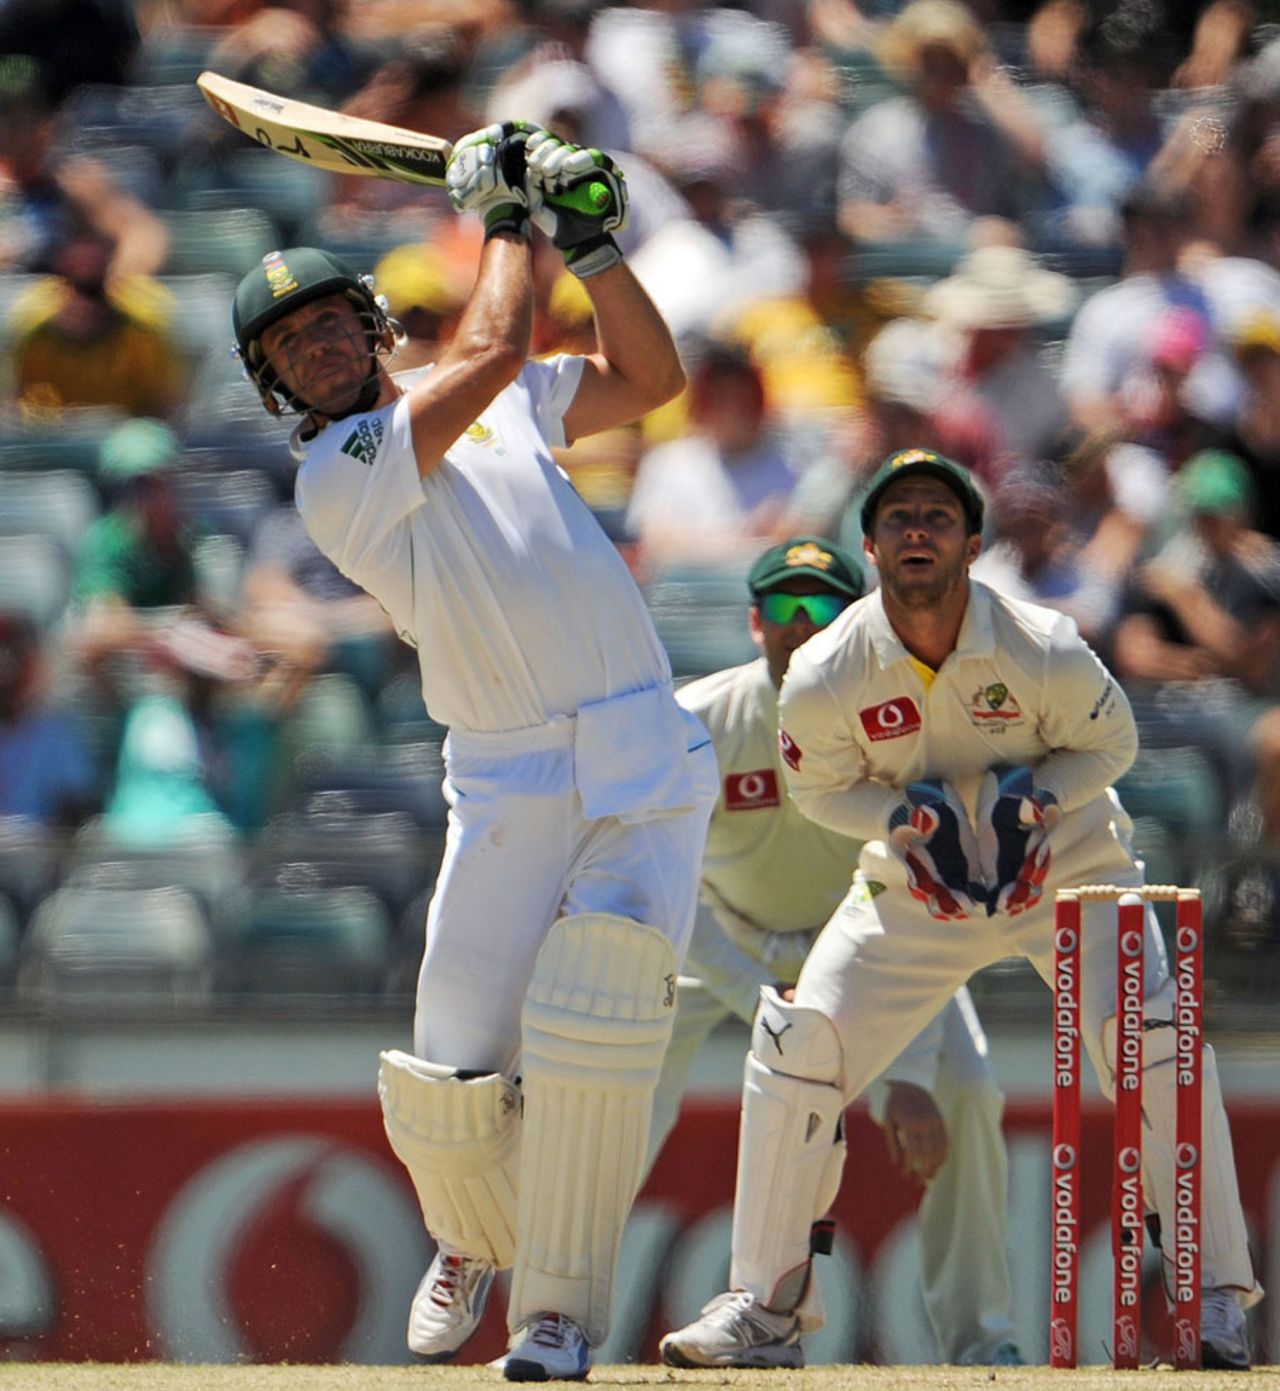 AB de Villiers powers the ball down the ground, Australia v South Africa, third Test, 3rd day, Perth, December 2, 2012